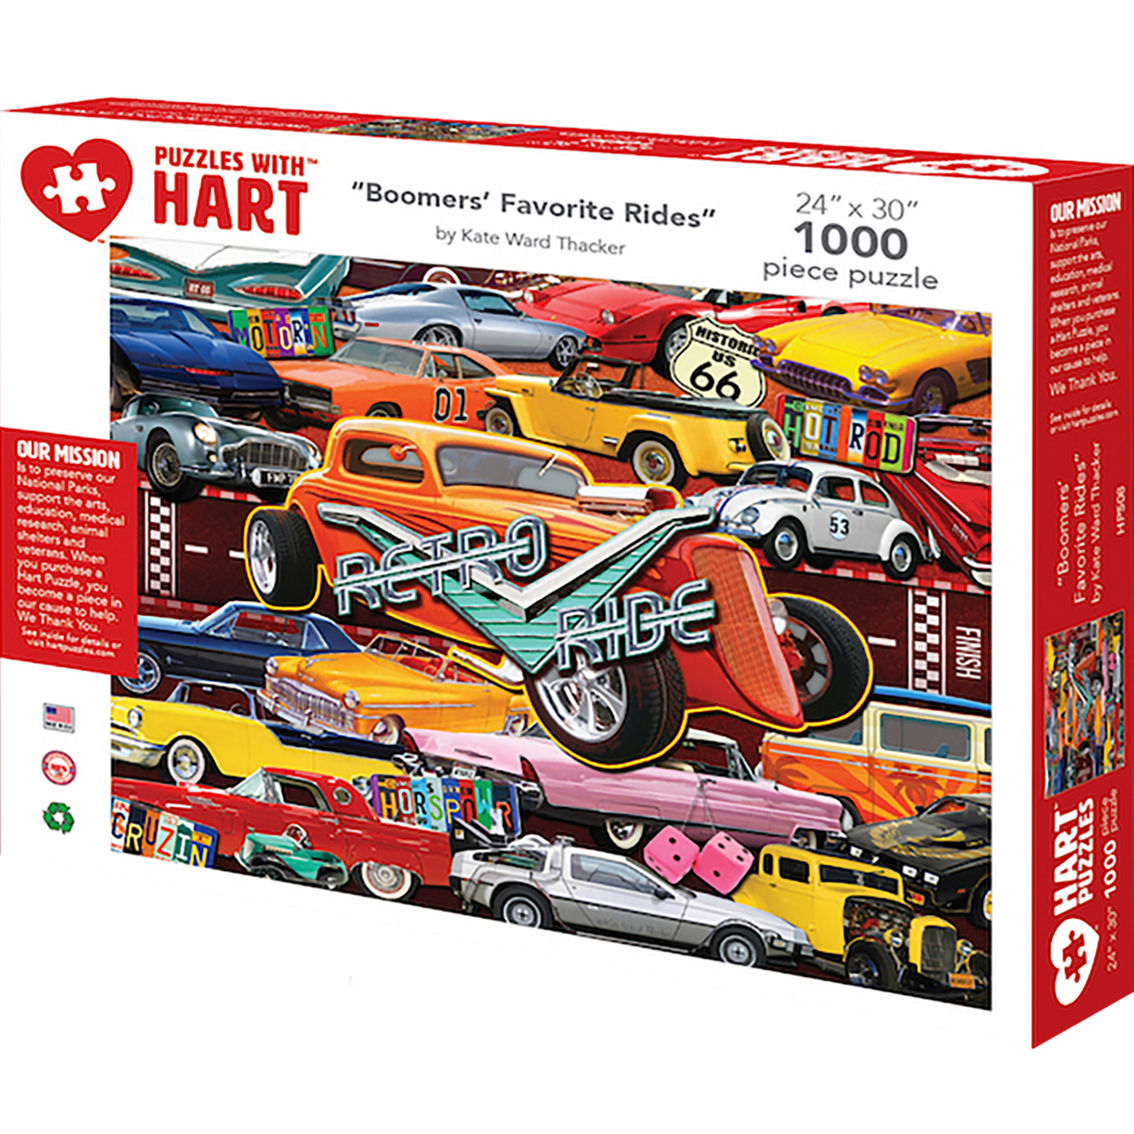 Hart Puzzles Boomers' Favorite Rides 1000 pc. Puzzle - Image 2 of 6